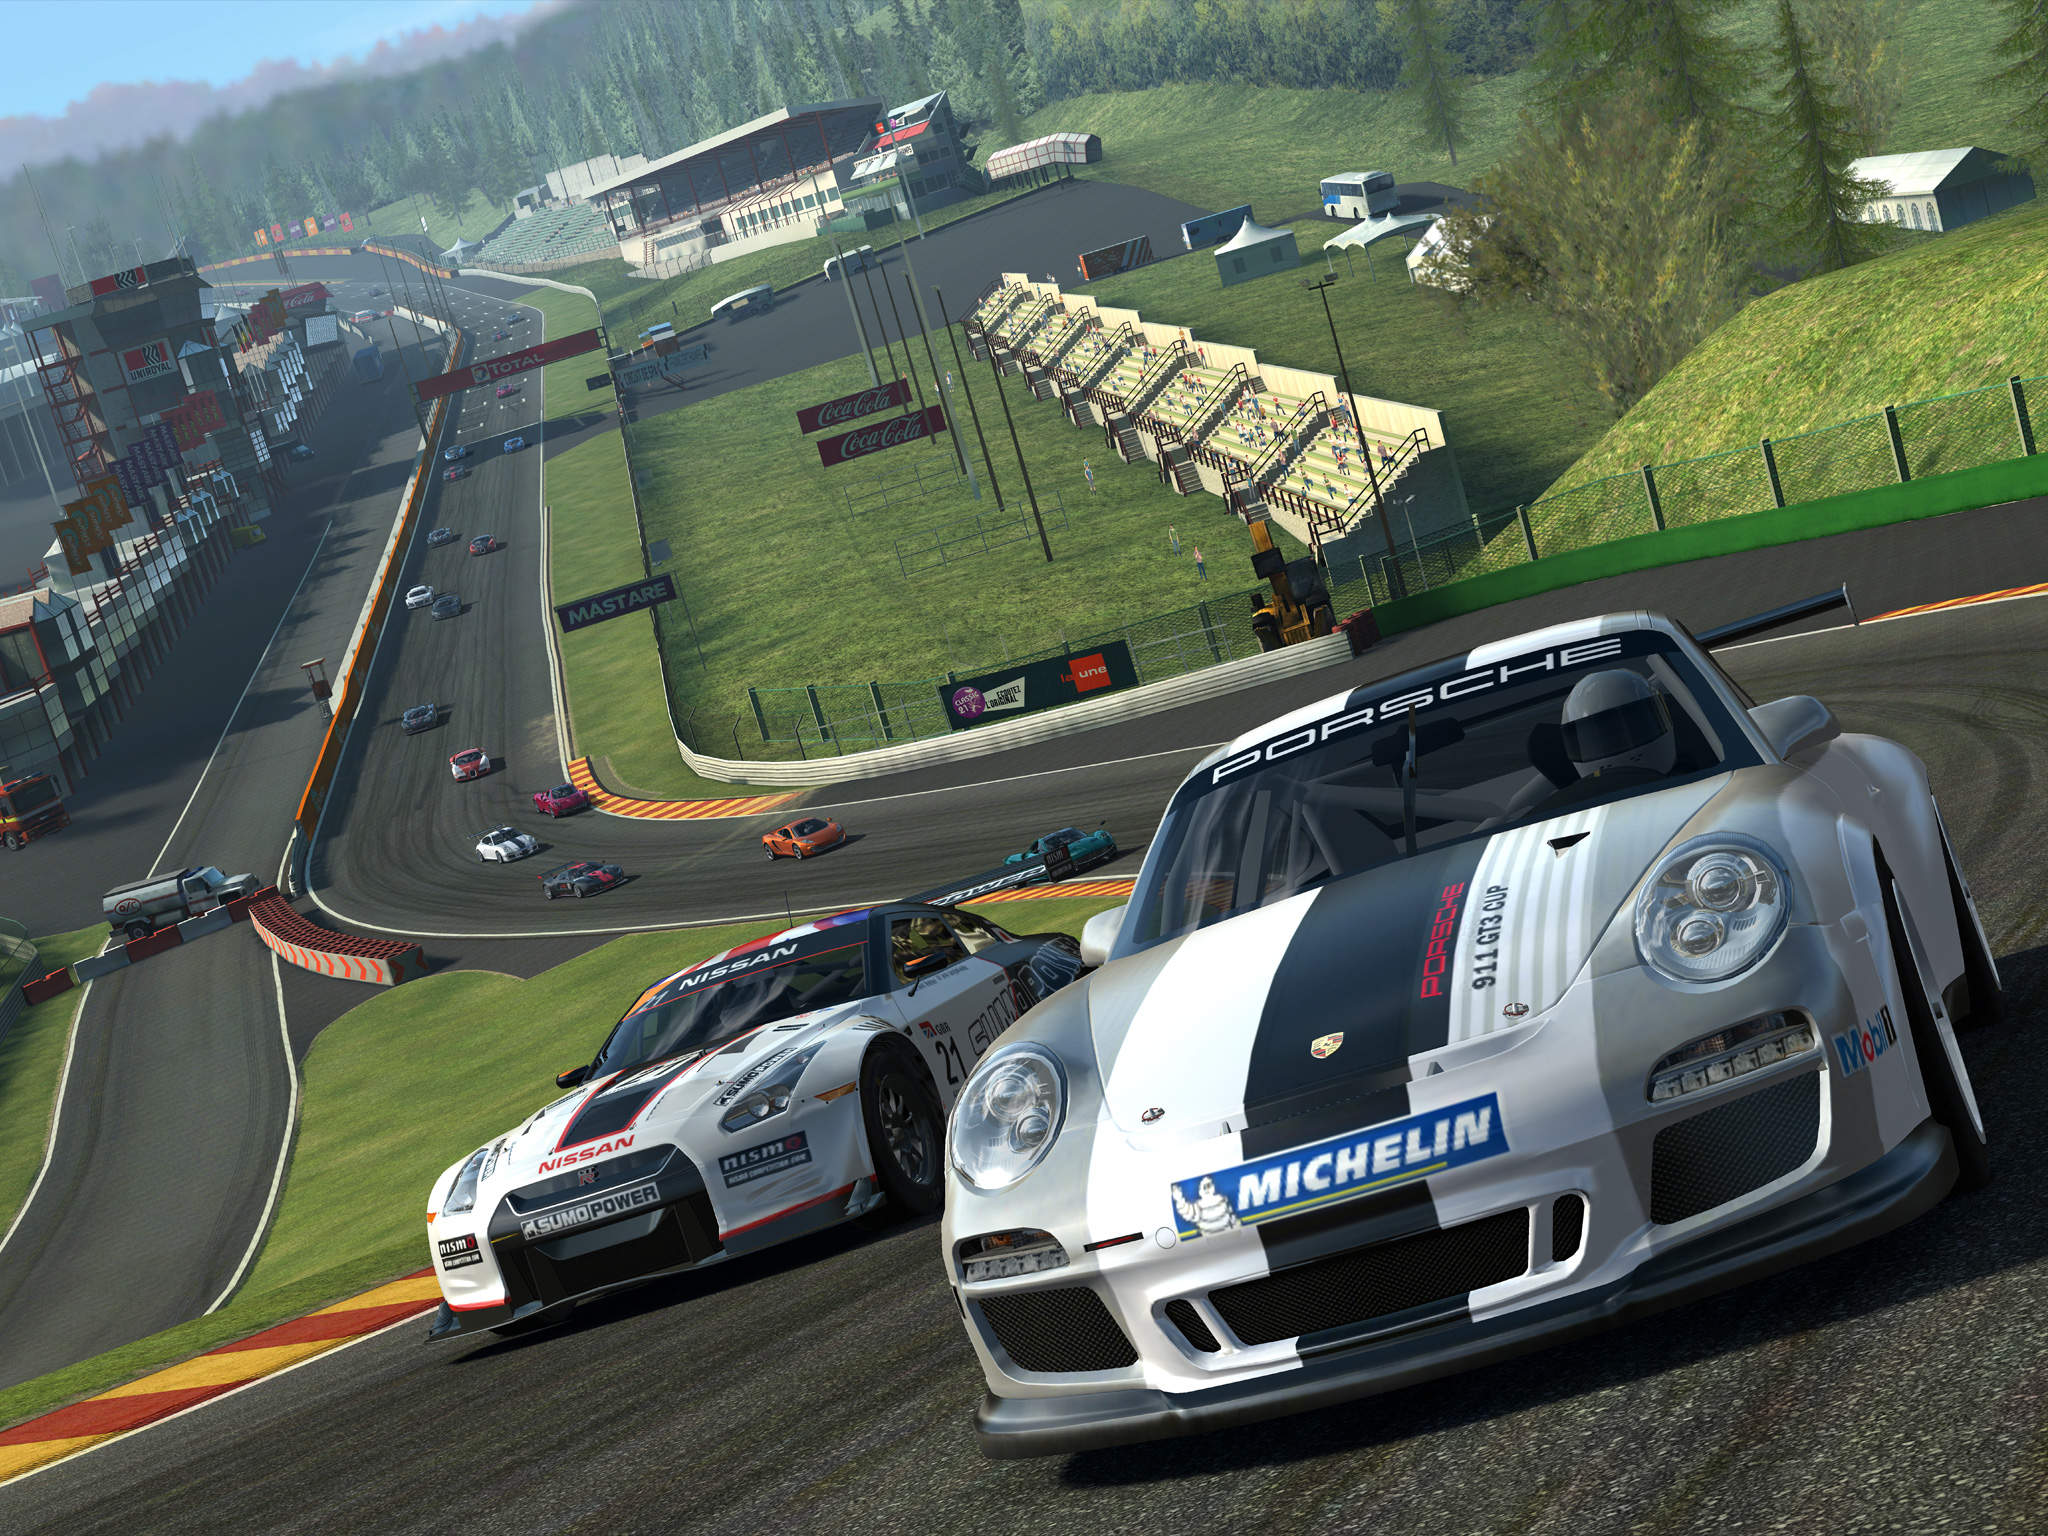 Real Racing 3 Update Brings New Cars, New Track, HUD Customization and More